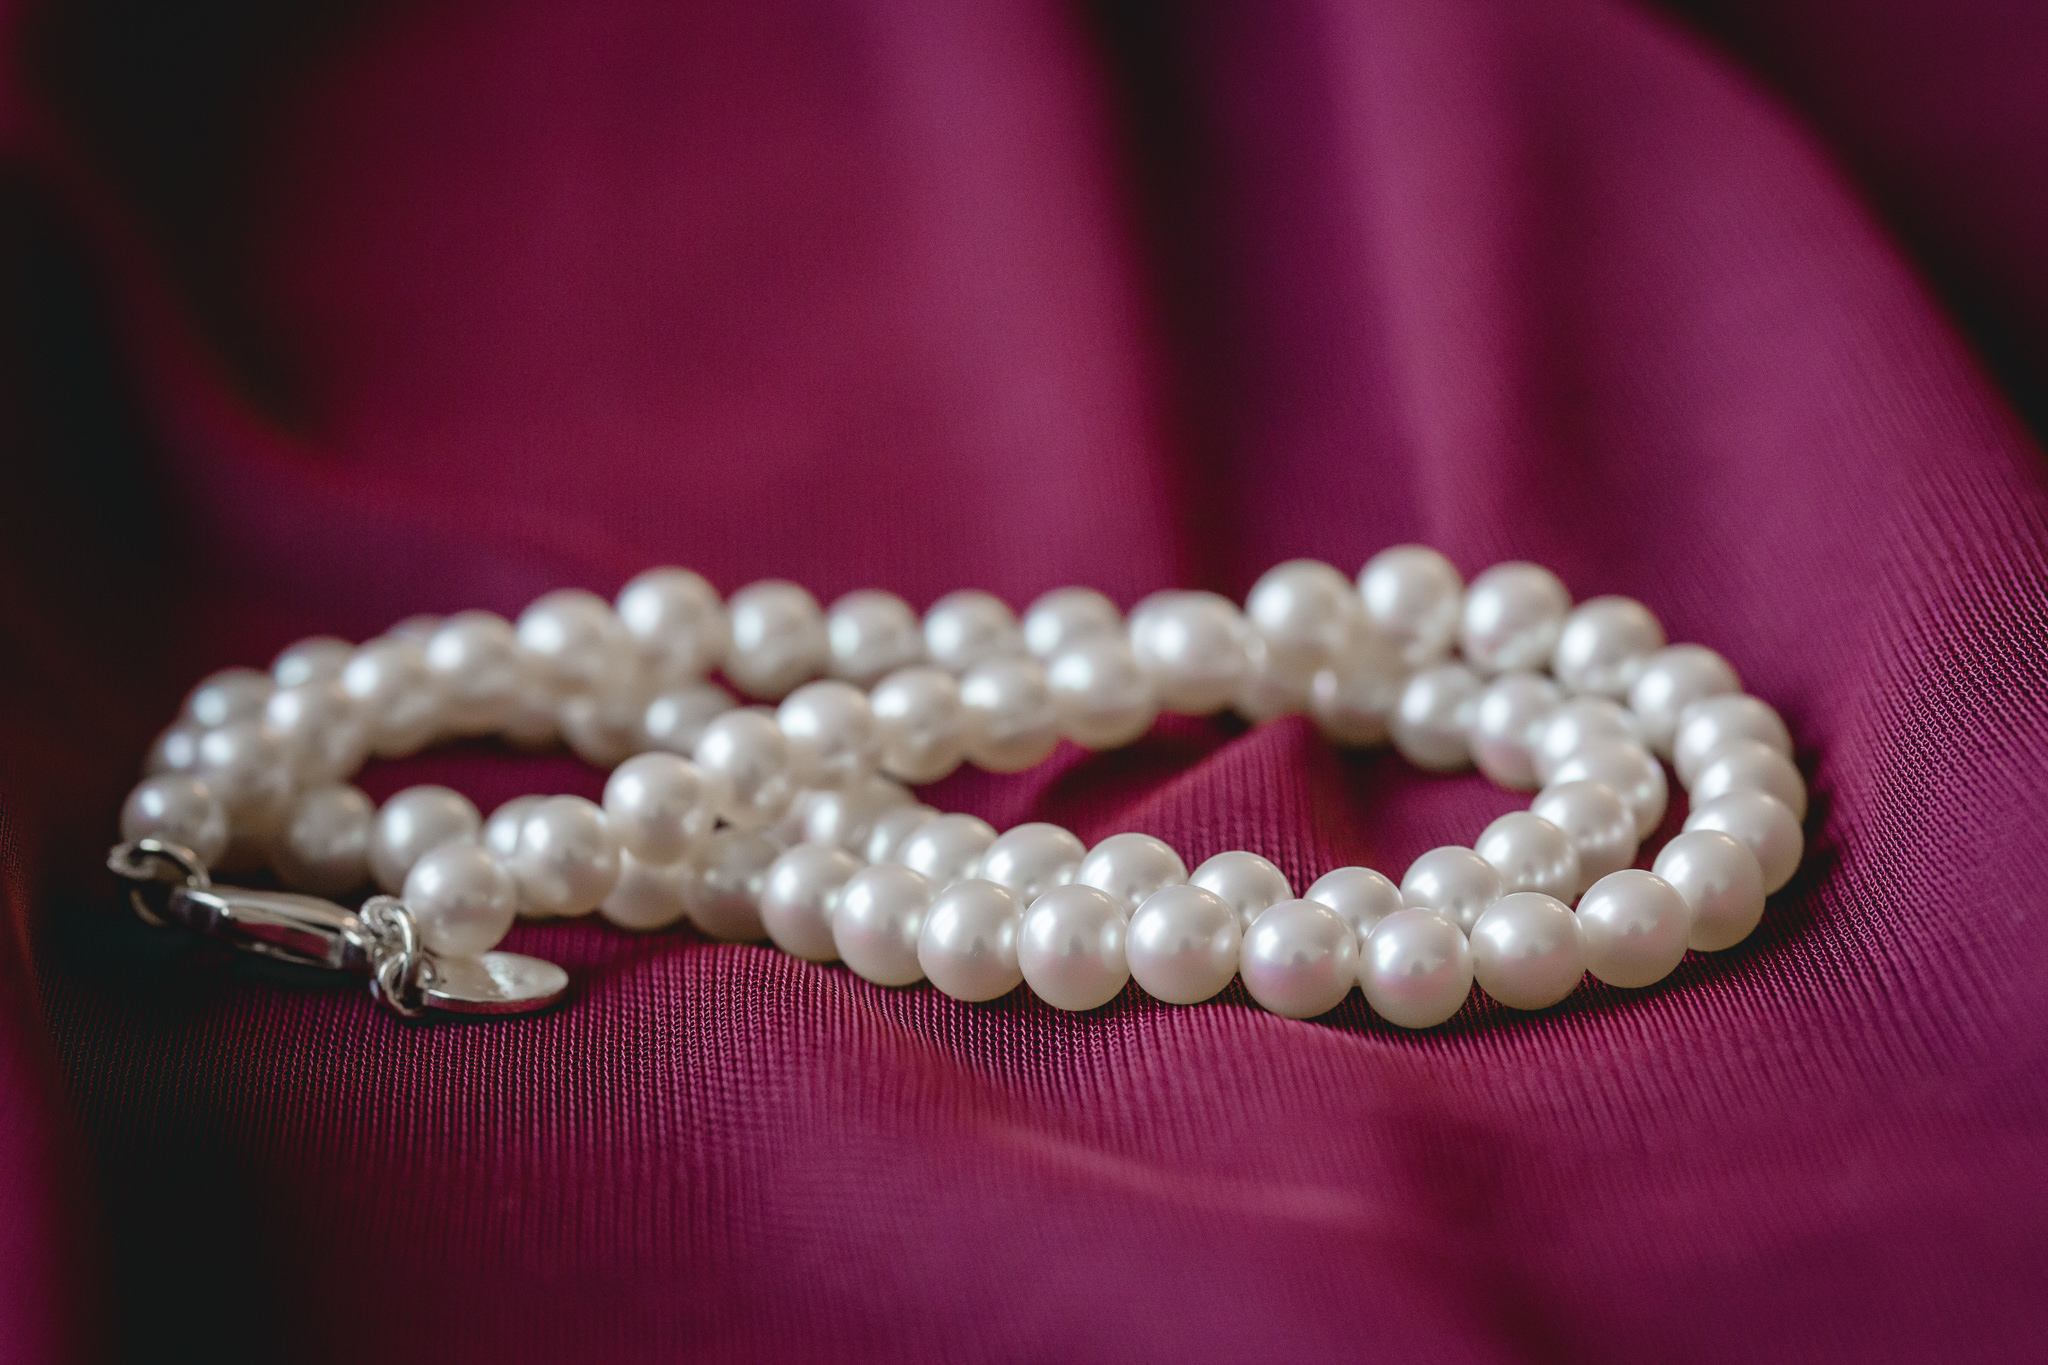 Bride's white pearl necklace against a wine colored bridesmaids dress